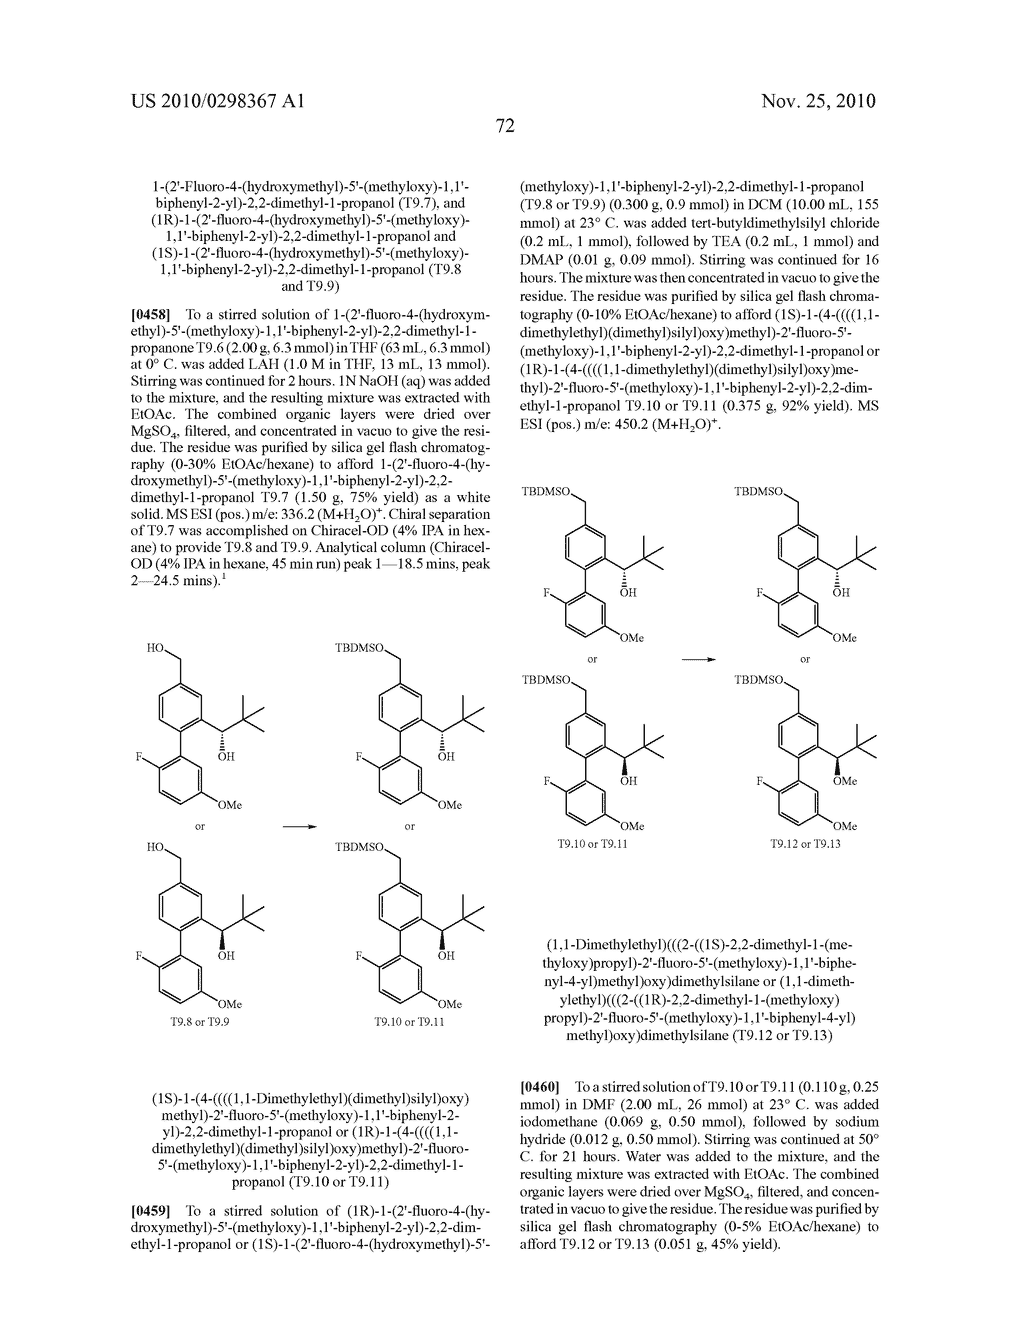 Conformationally Constrained Carboxylic Acid Derivatives Useful for Treating Metabolic Disorders - diagram, schematic, and image 74